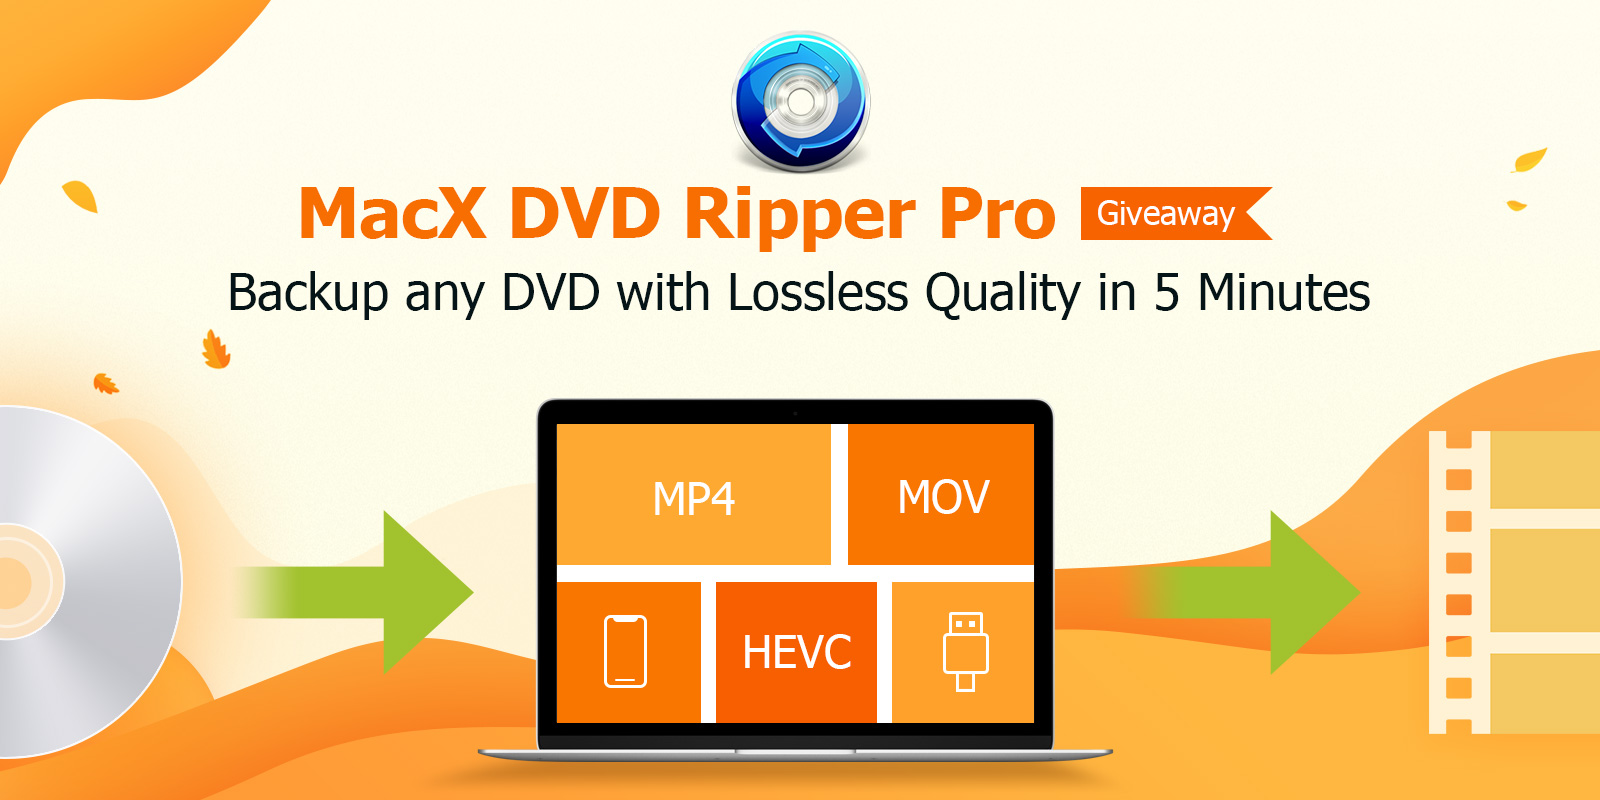 ★ MacX DVD Ripper Pro imports your DVD collection easily and quickly; and have promotion!